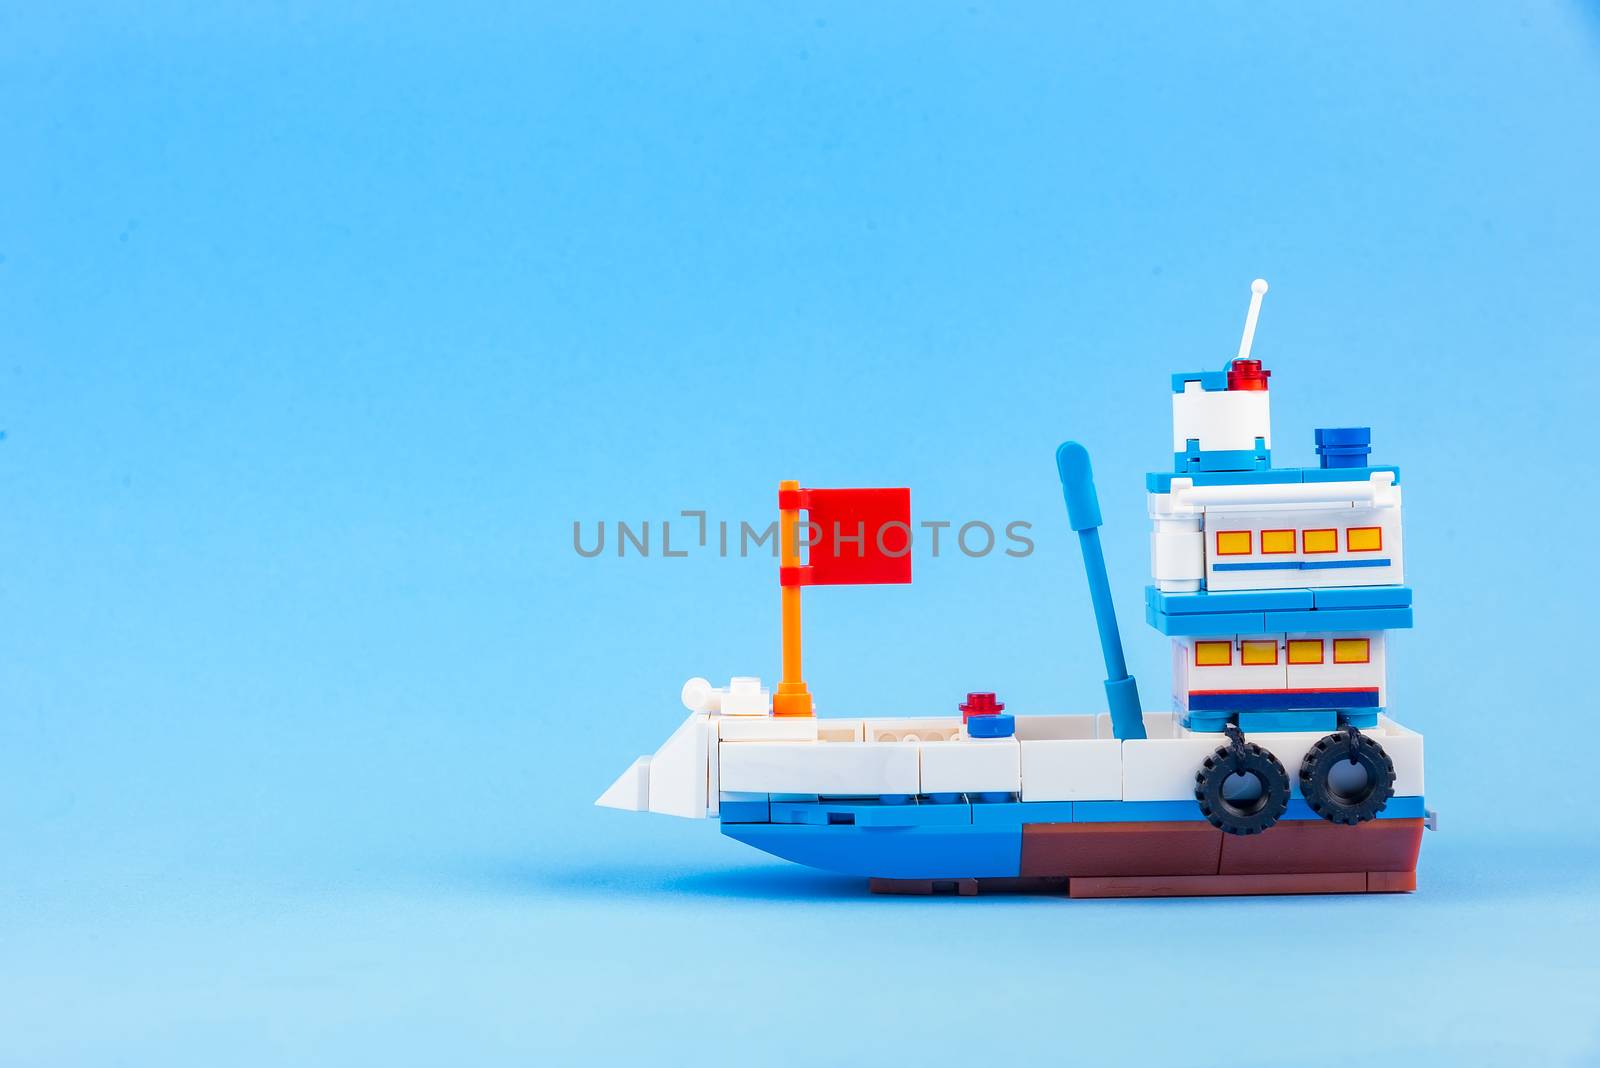 A fishing boat toy isolated on a blue background. by Bubbers